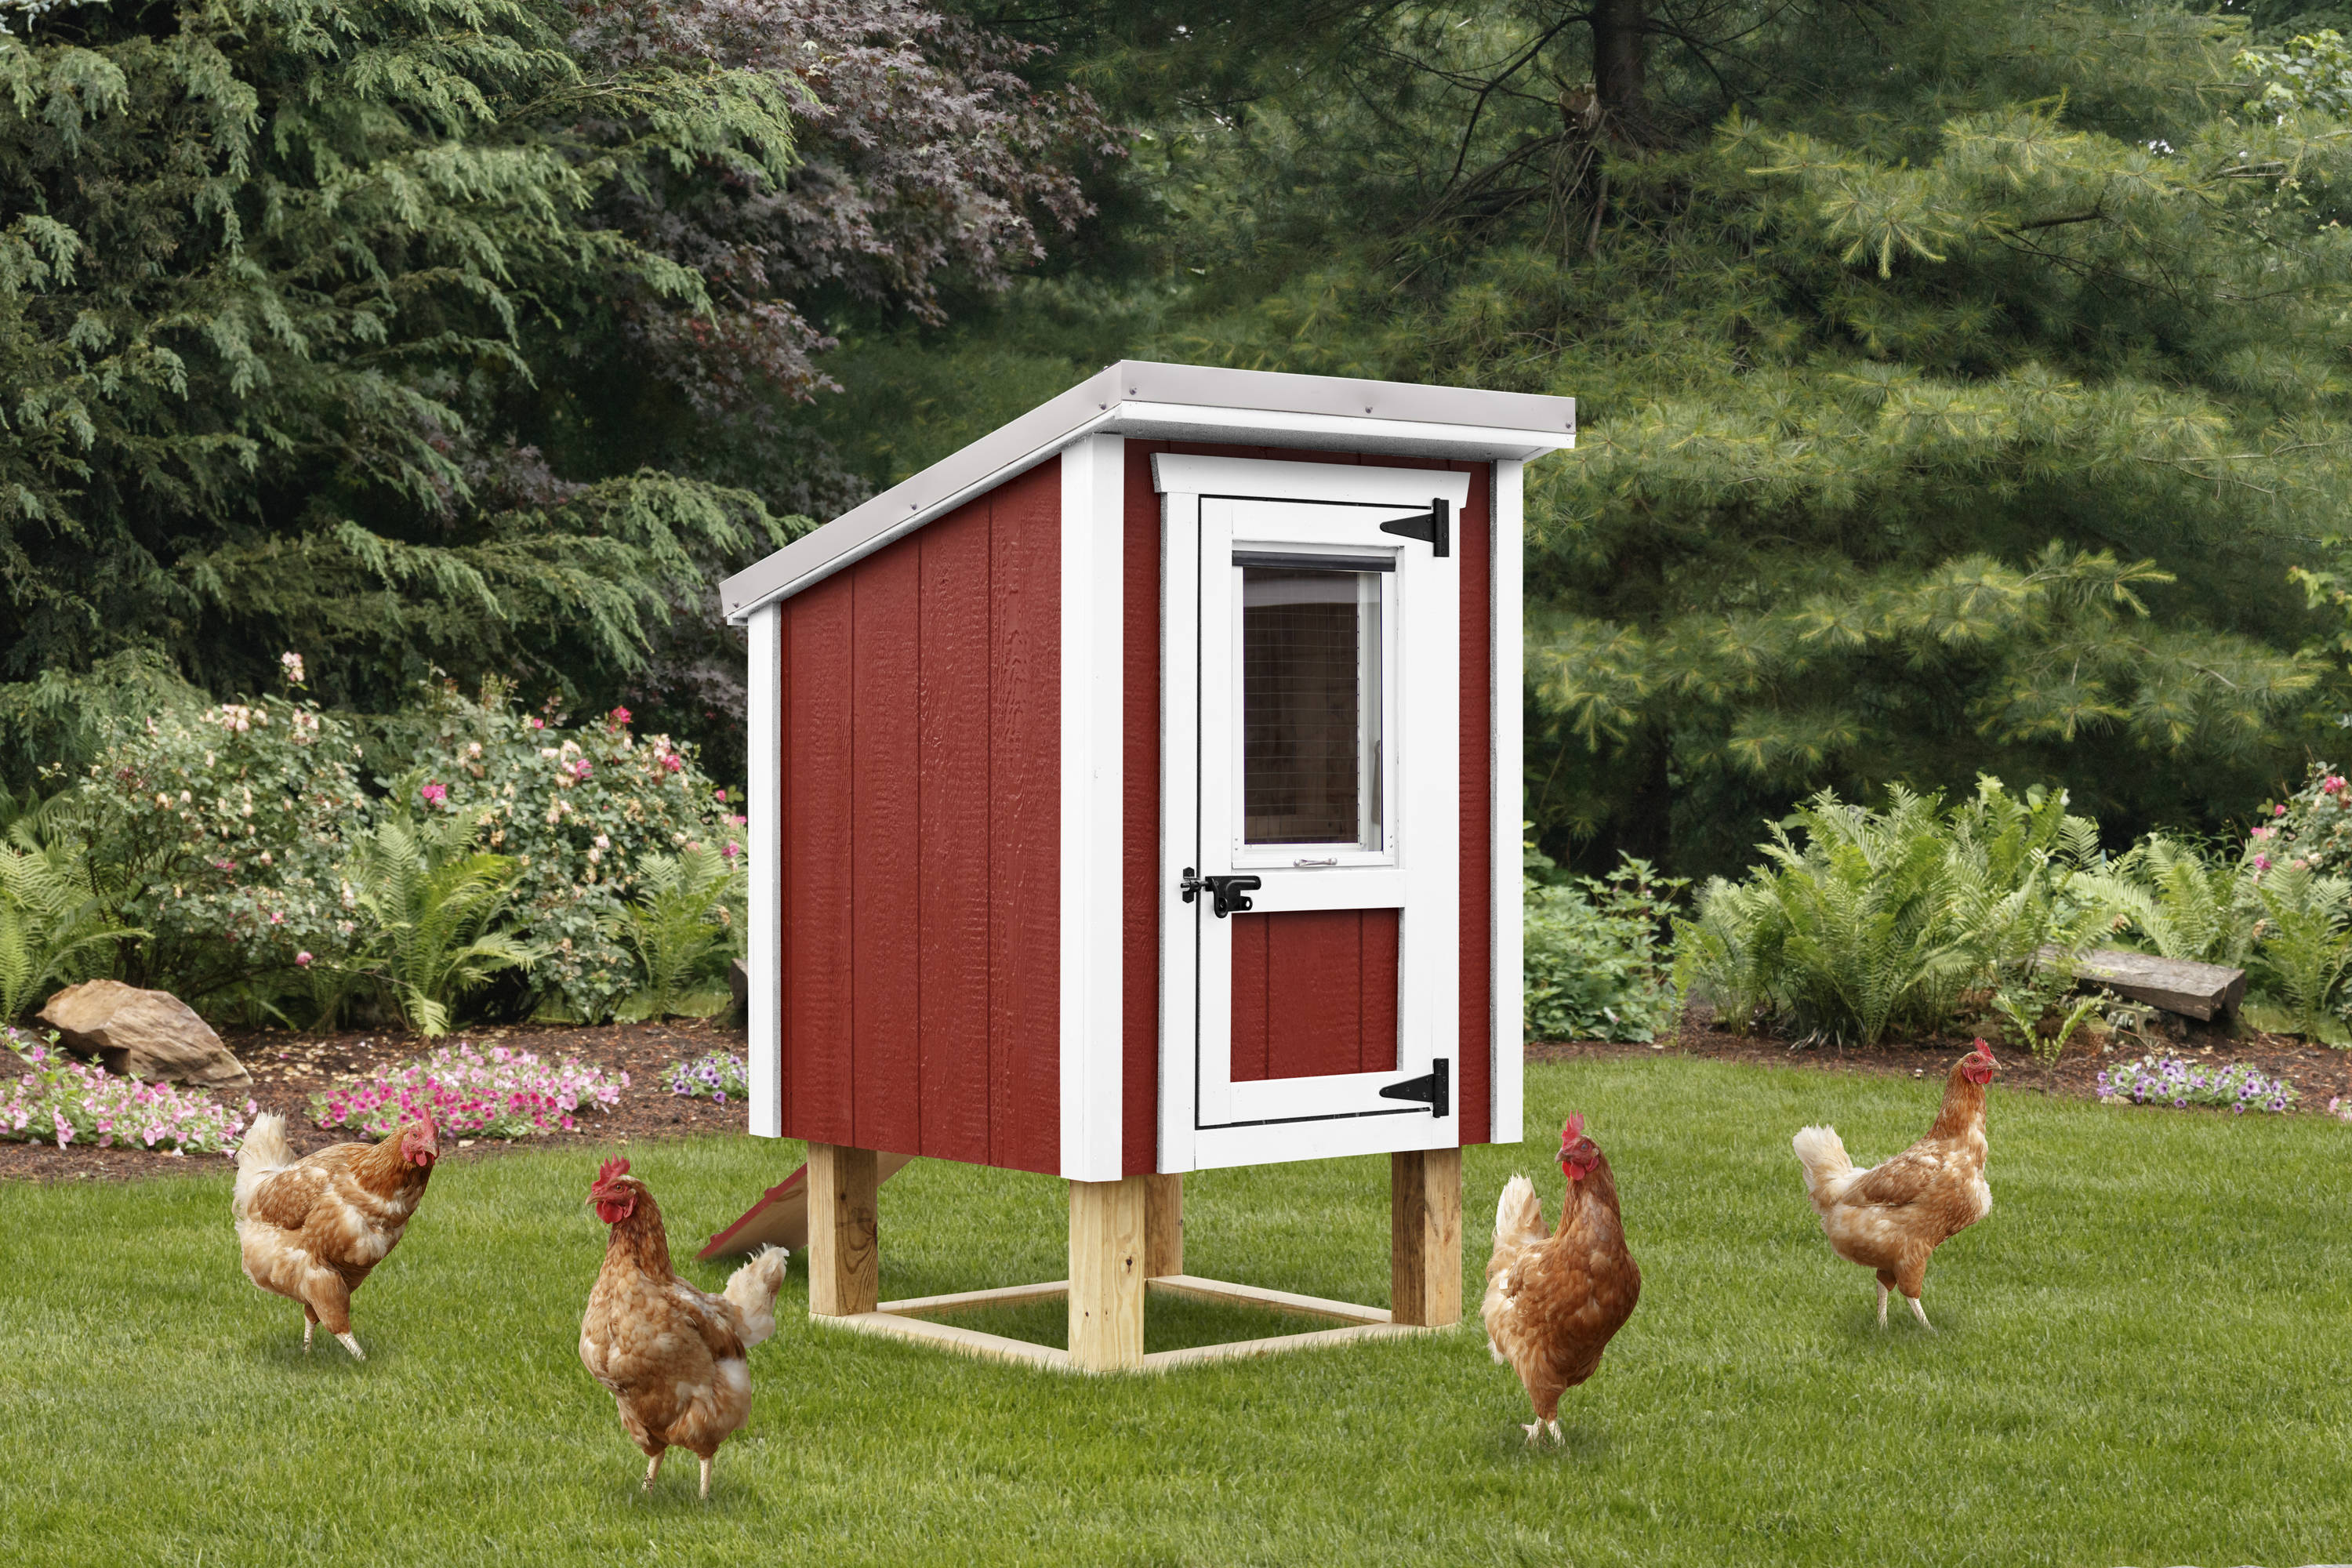 UNIVERSAL HAND MADE CHICKEN POULTRY HUT HOUSE 5 BIRD NEST BOX FOR INSIDE COOP 